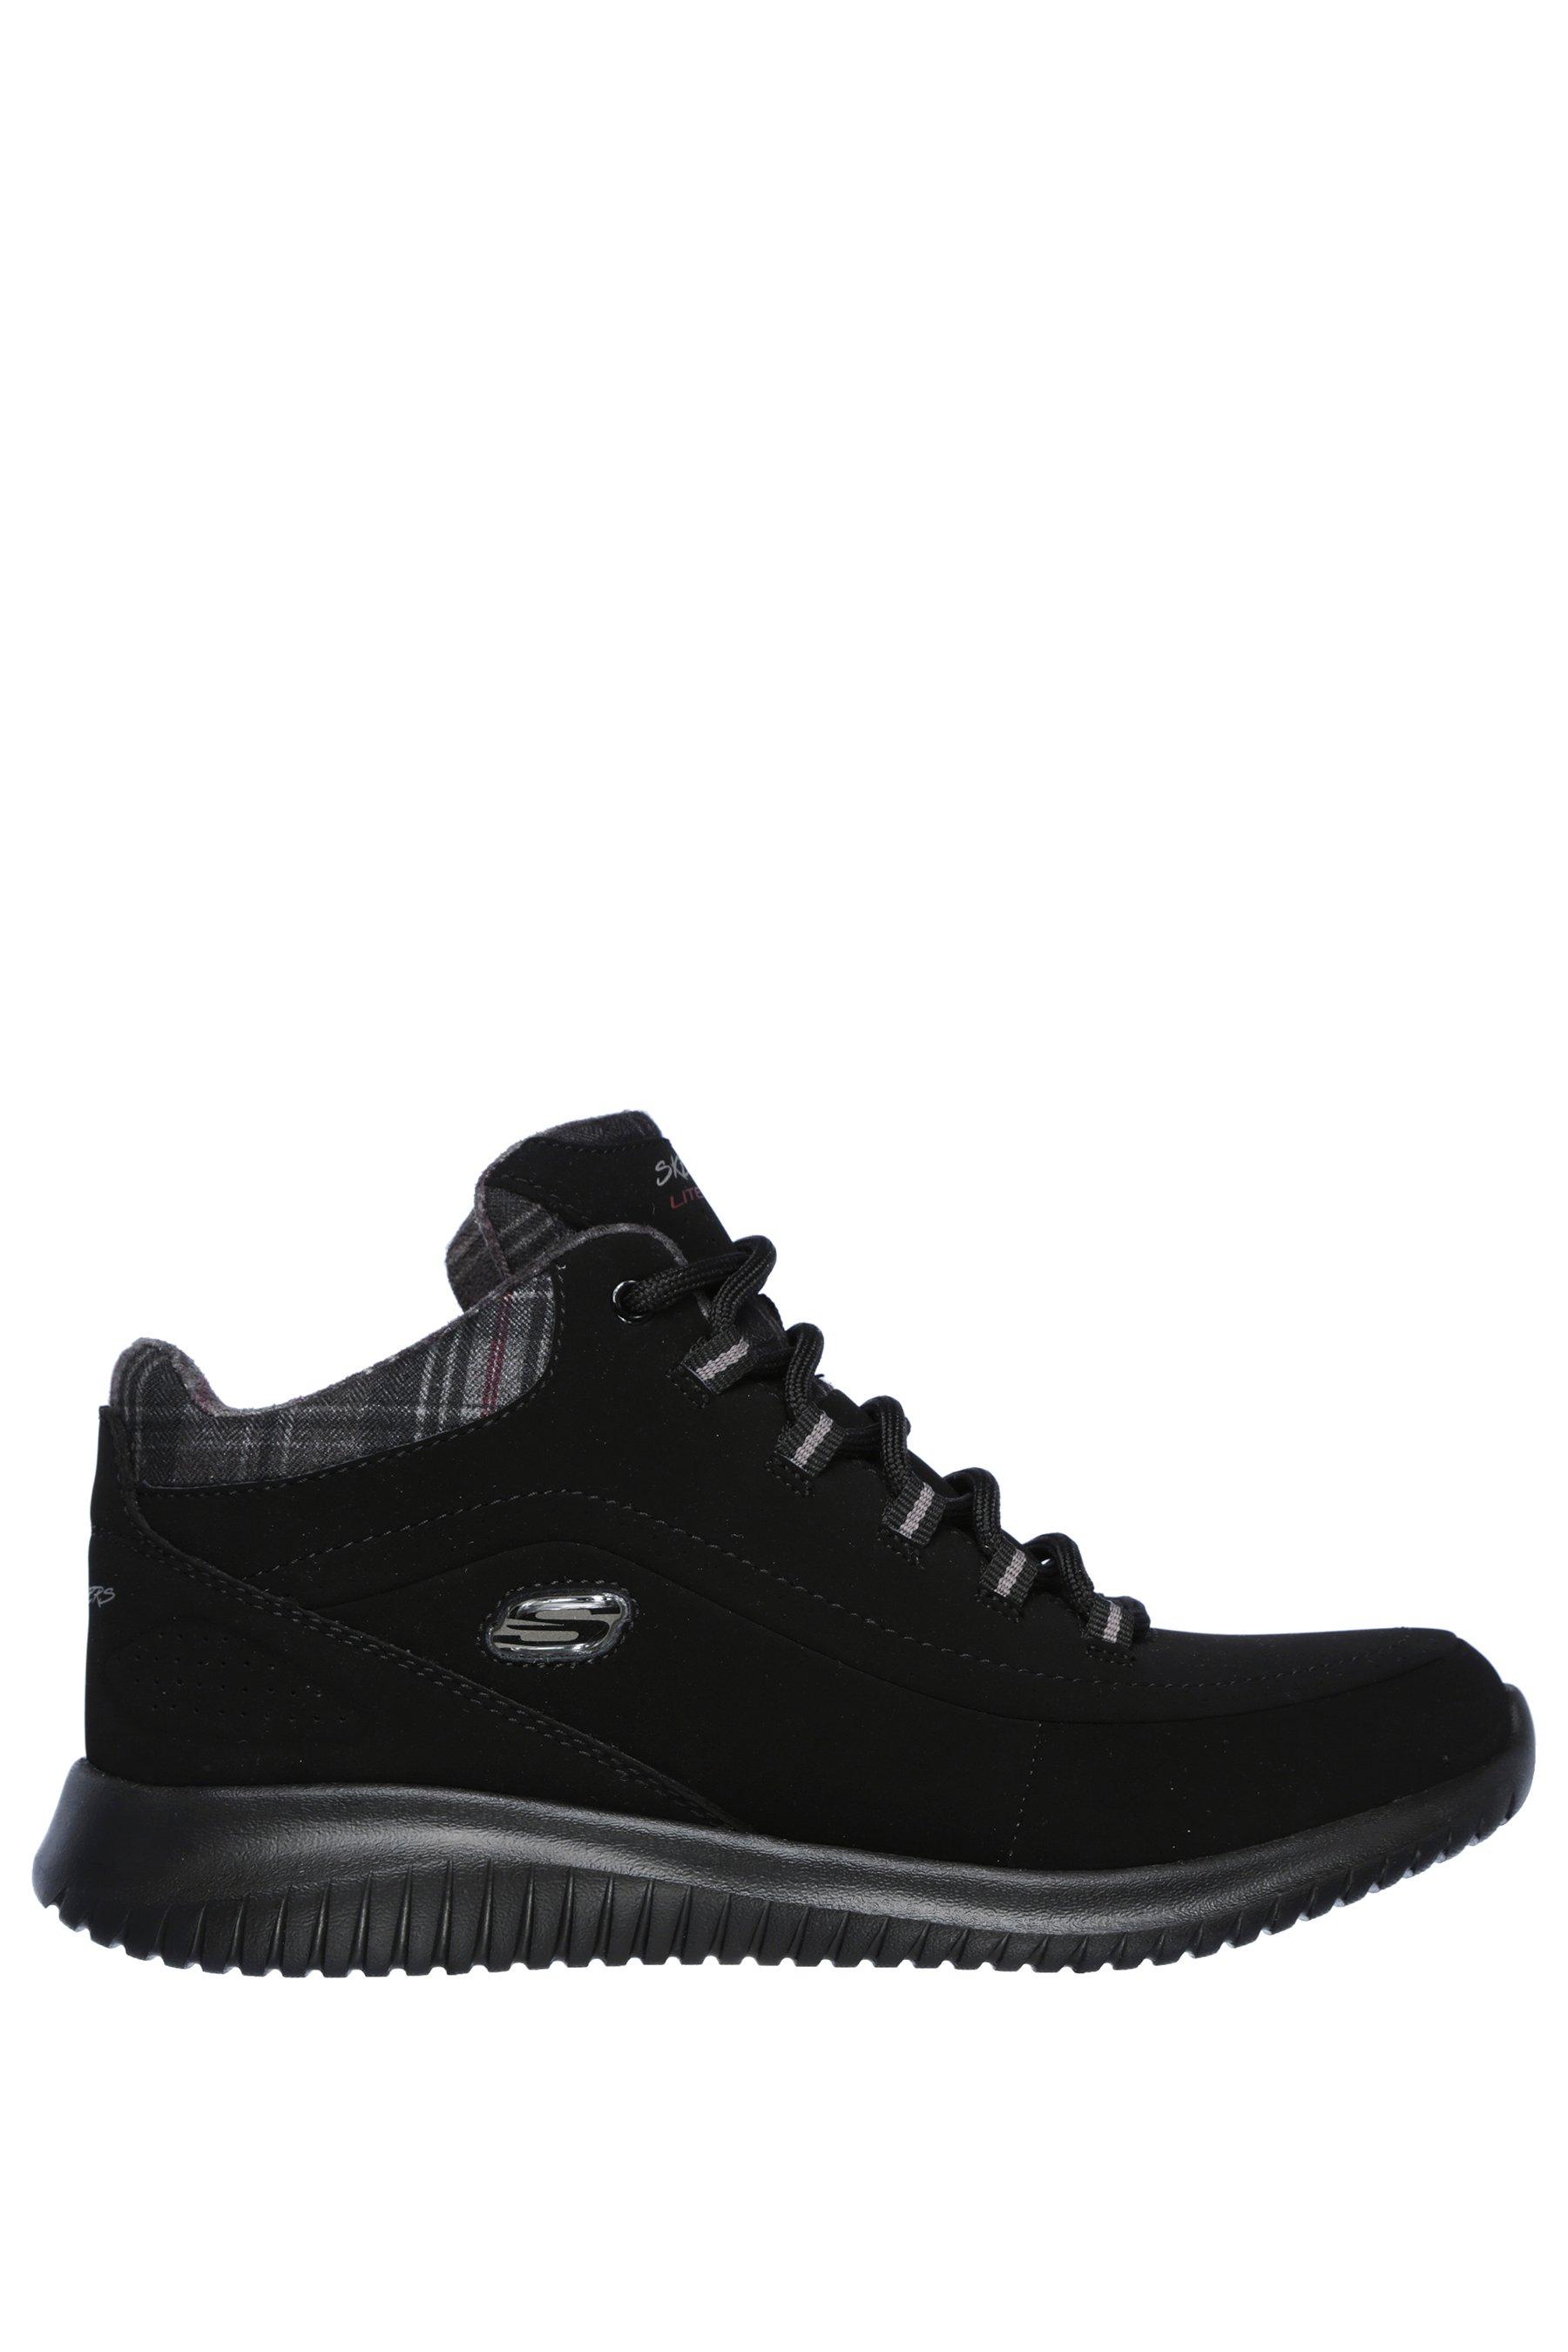 skechers ultra flex just chill ankle boot